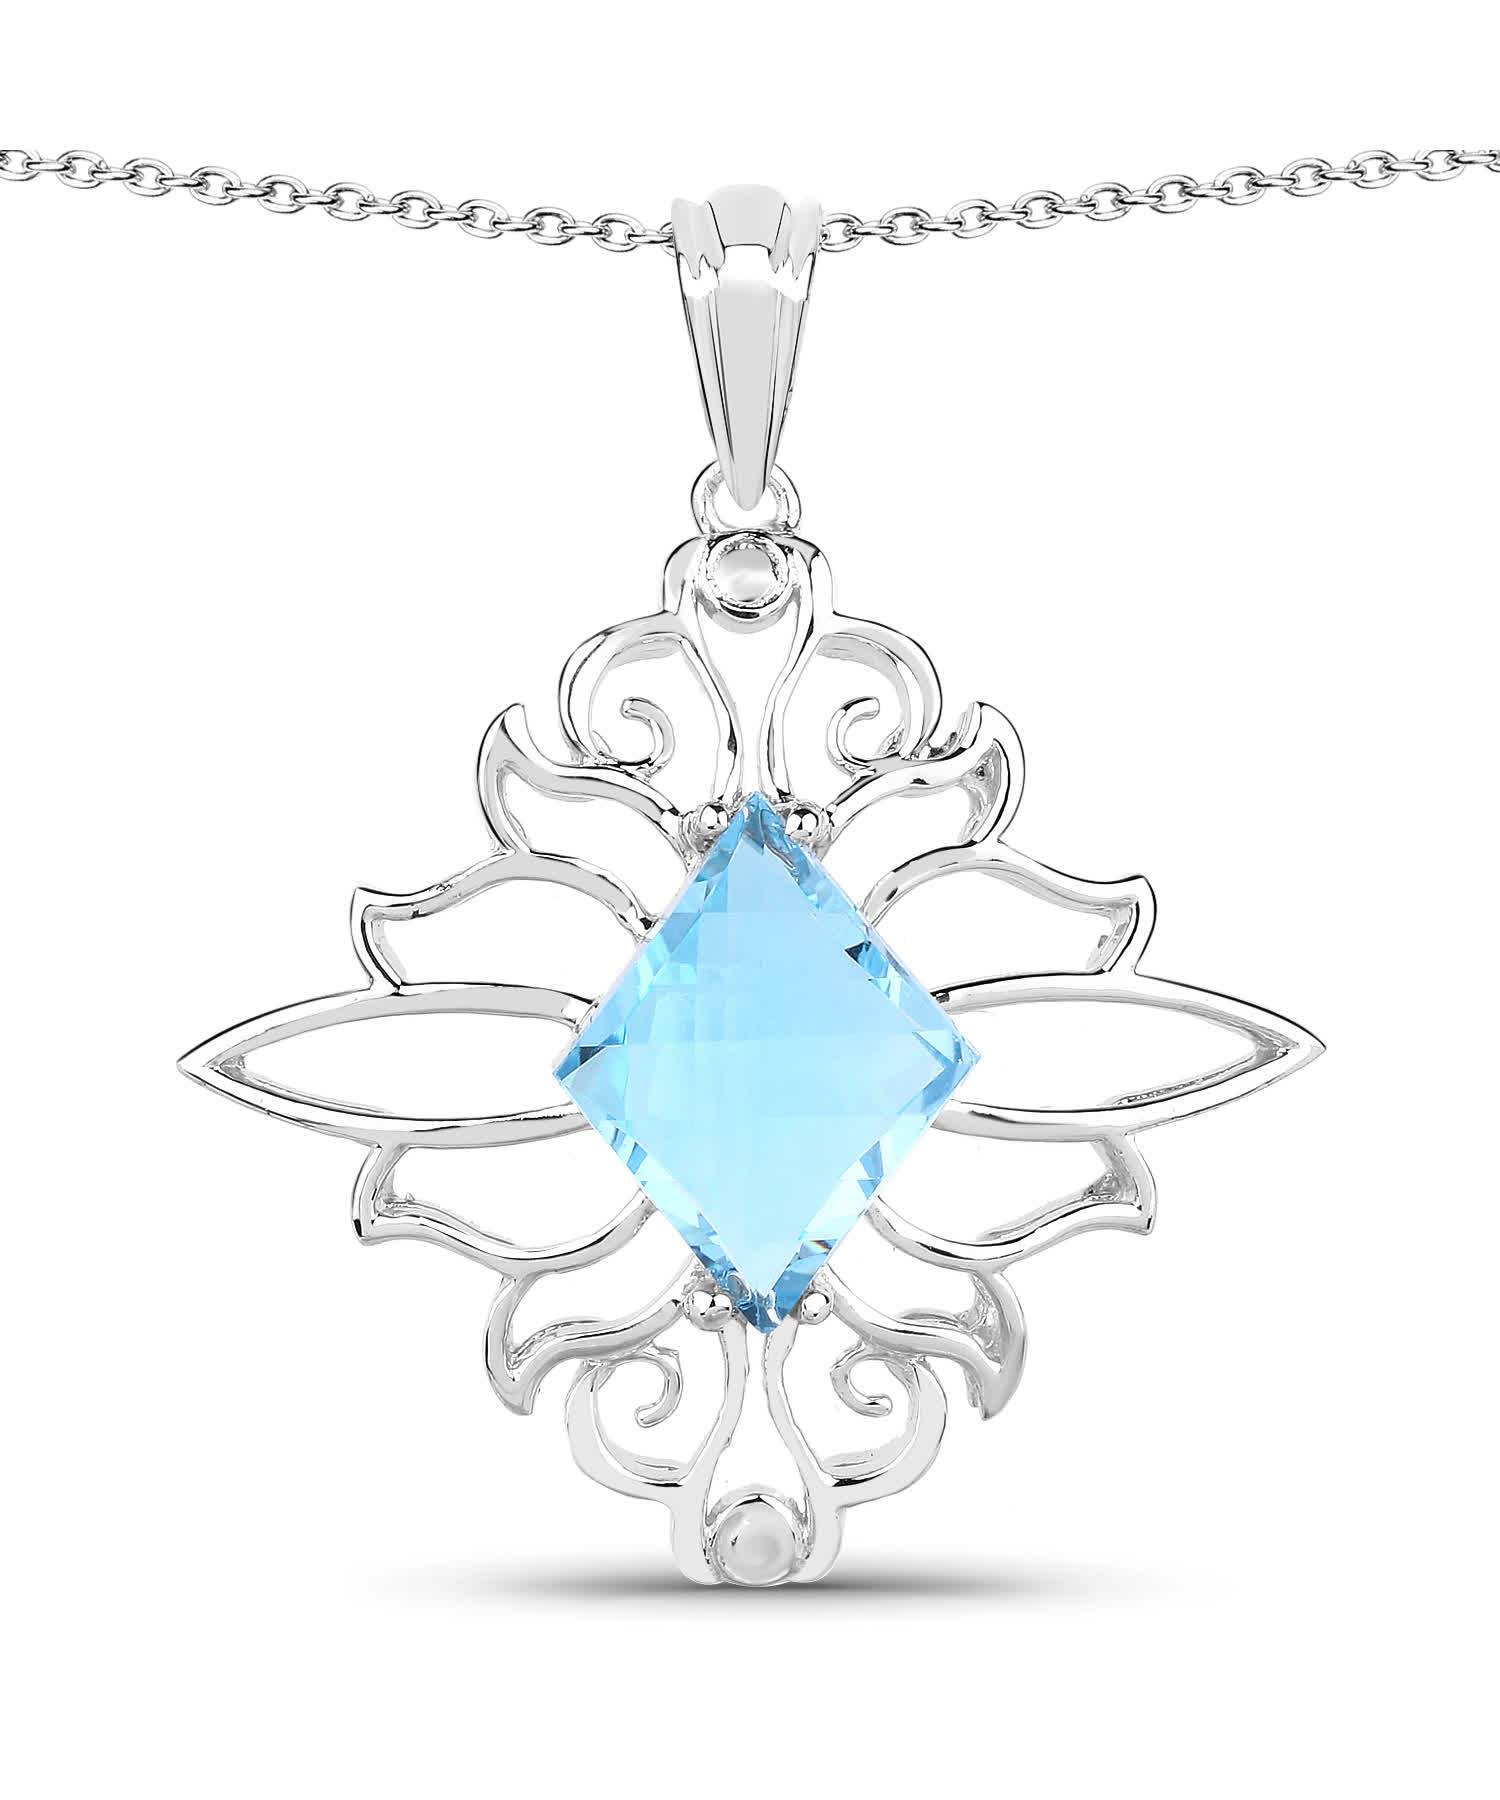 5.15ctw Natural Swiss Blue Topaz Rhodium Plated 925 Sterling Silver Pendant With Chain View 1